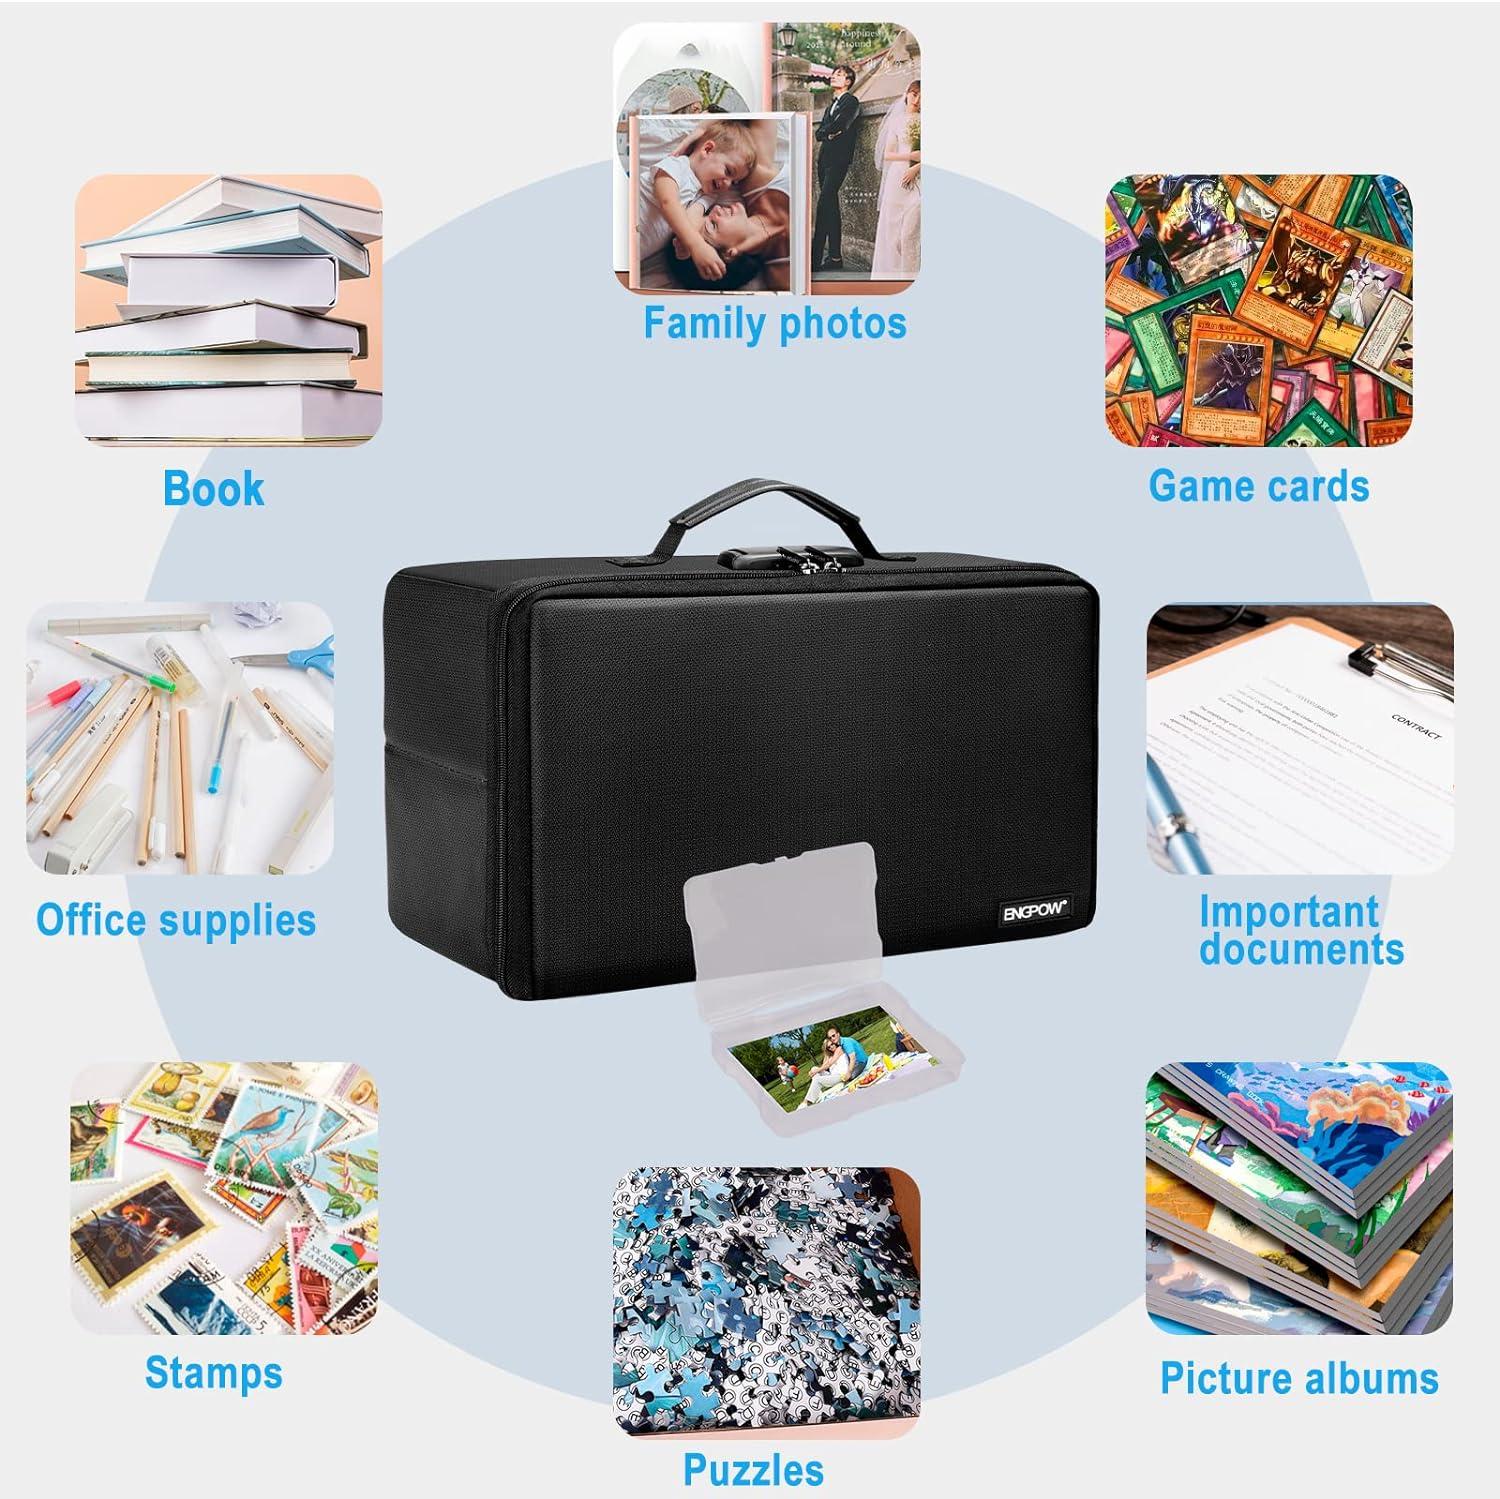 ENGPOW Fireproof Photo Storage Box with 12 Inner 4 x 6 Photo Case(Clear)  Photo Box Organizer with Lock Collapsible Portable Photo Storage Containers  with Handle for Photos Picture Valuables Box + 12